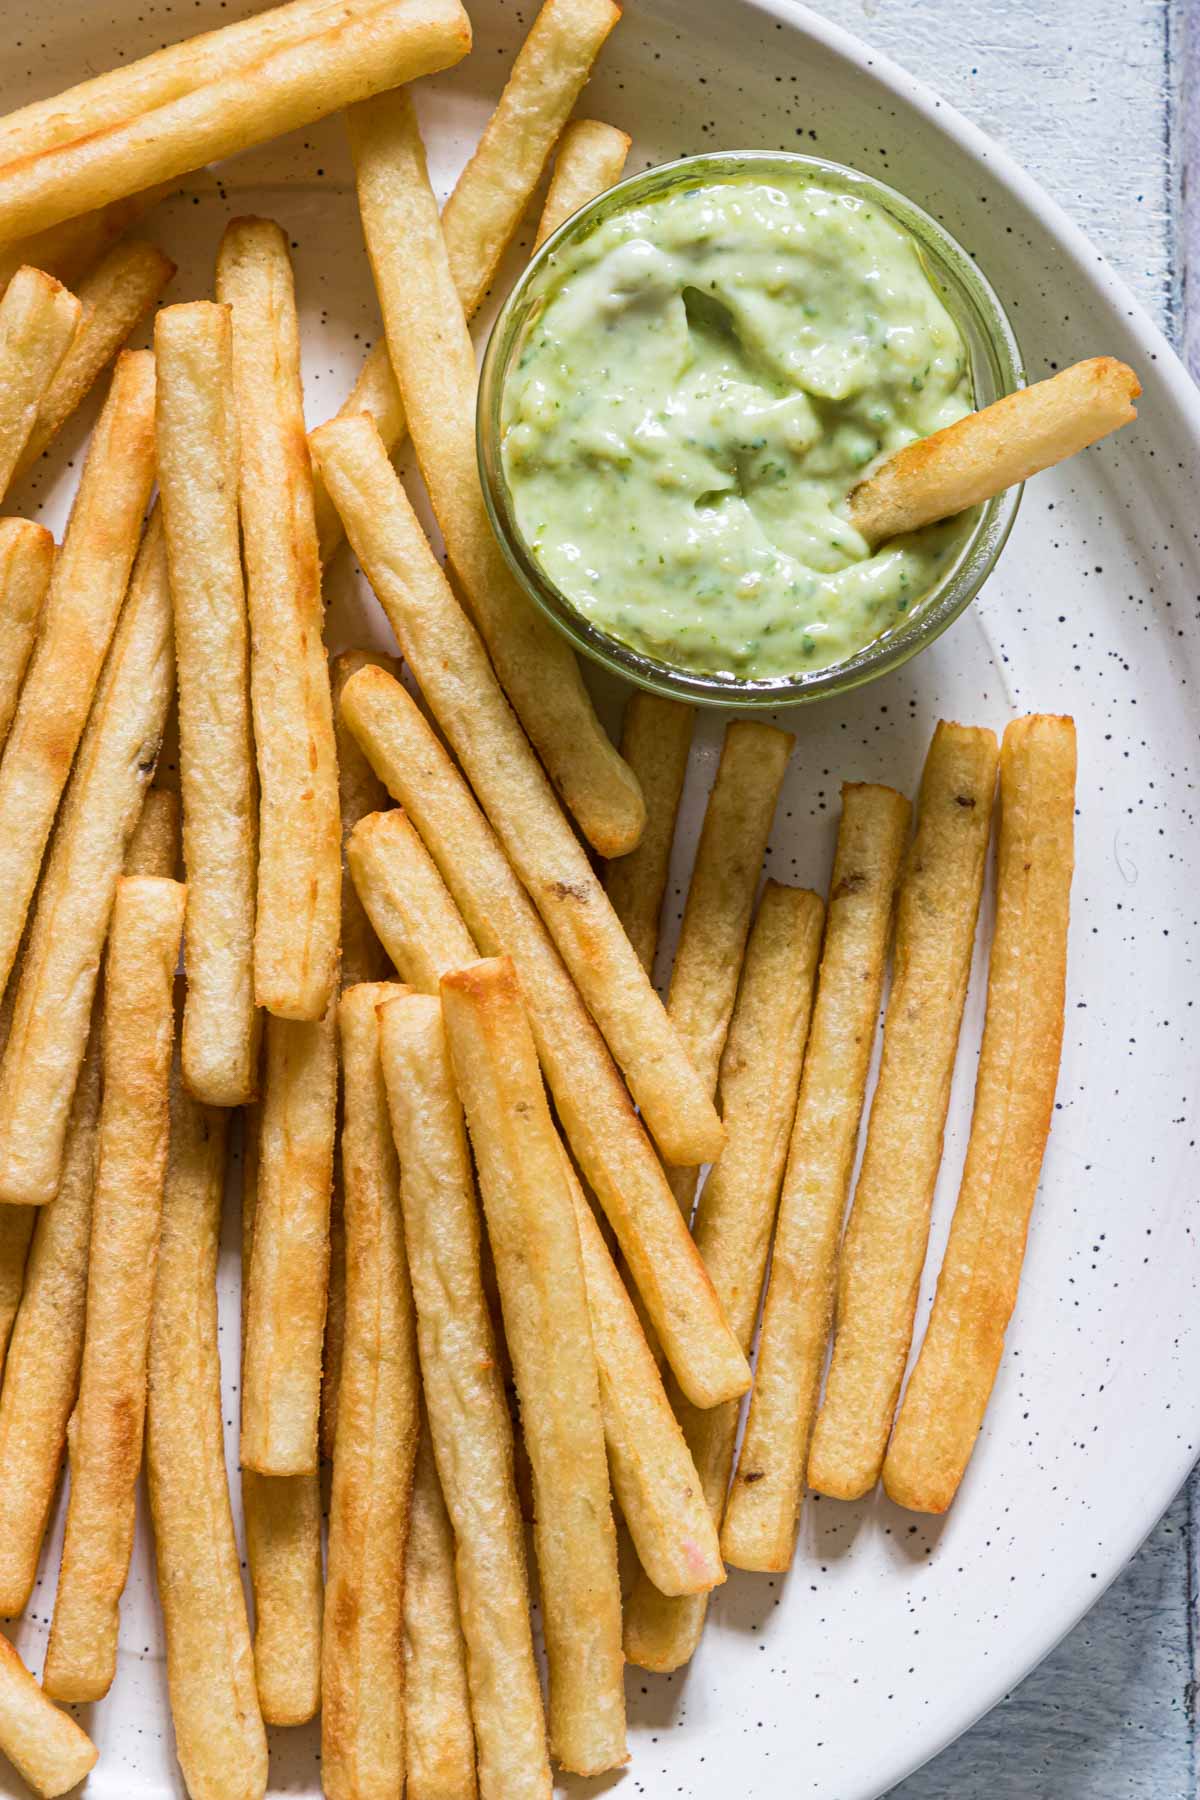 a plate of french fries served with the basil pesto aioli sauce